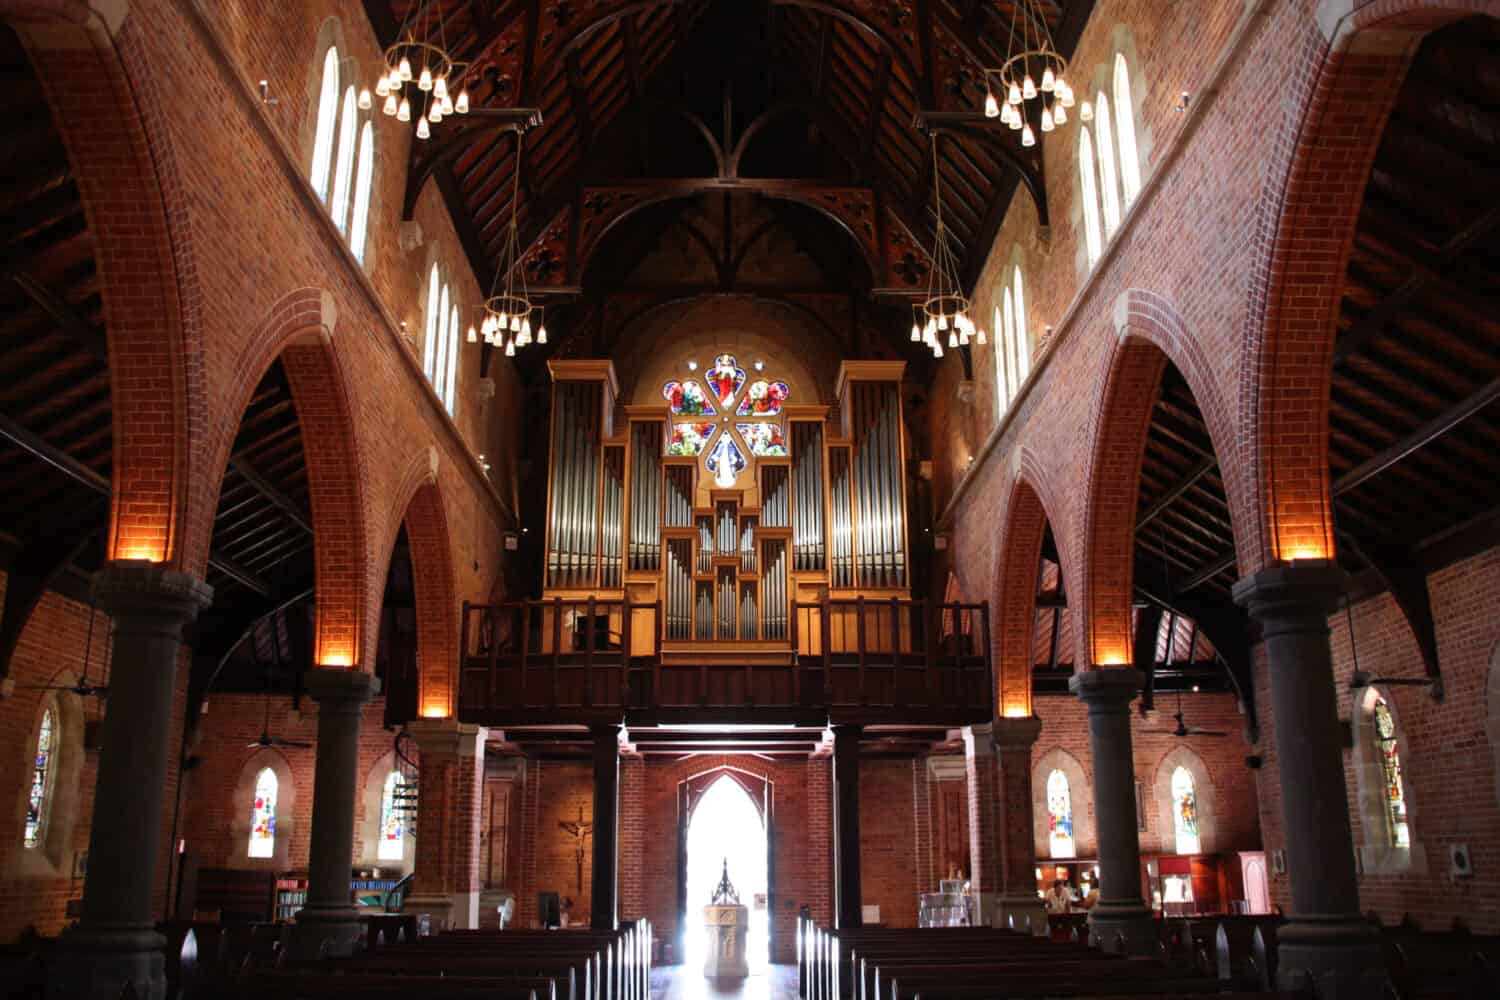 St. George's Anglican Cathedral in Perth, Western Australia